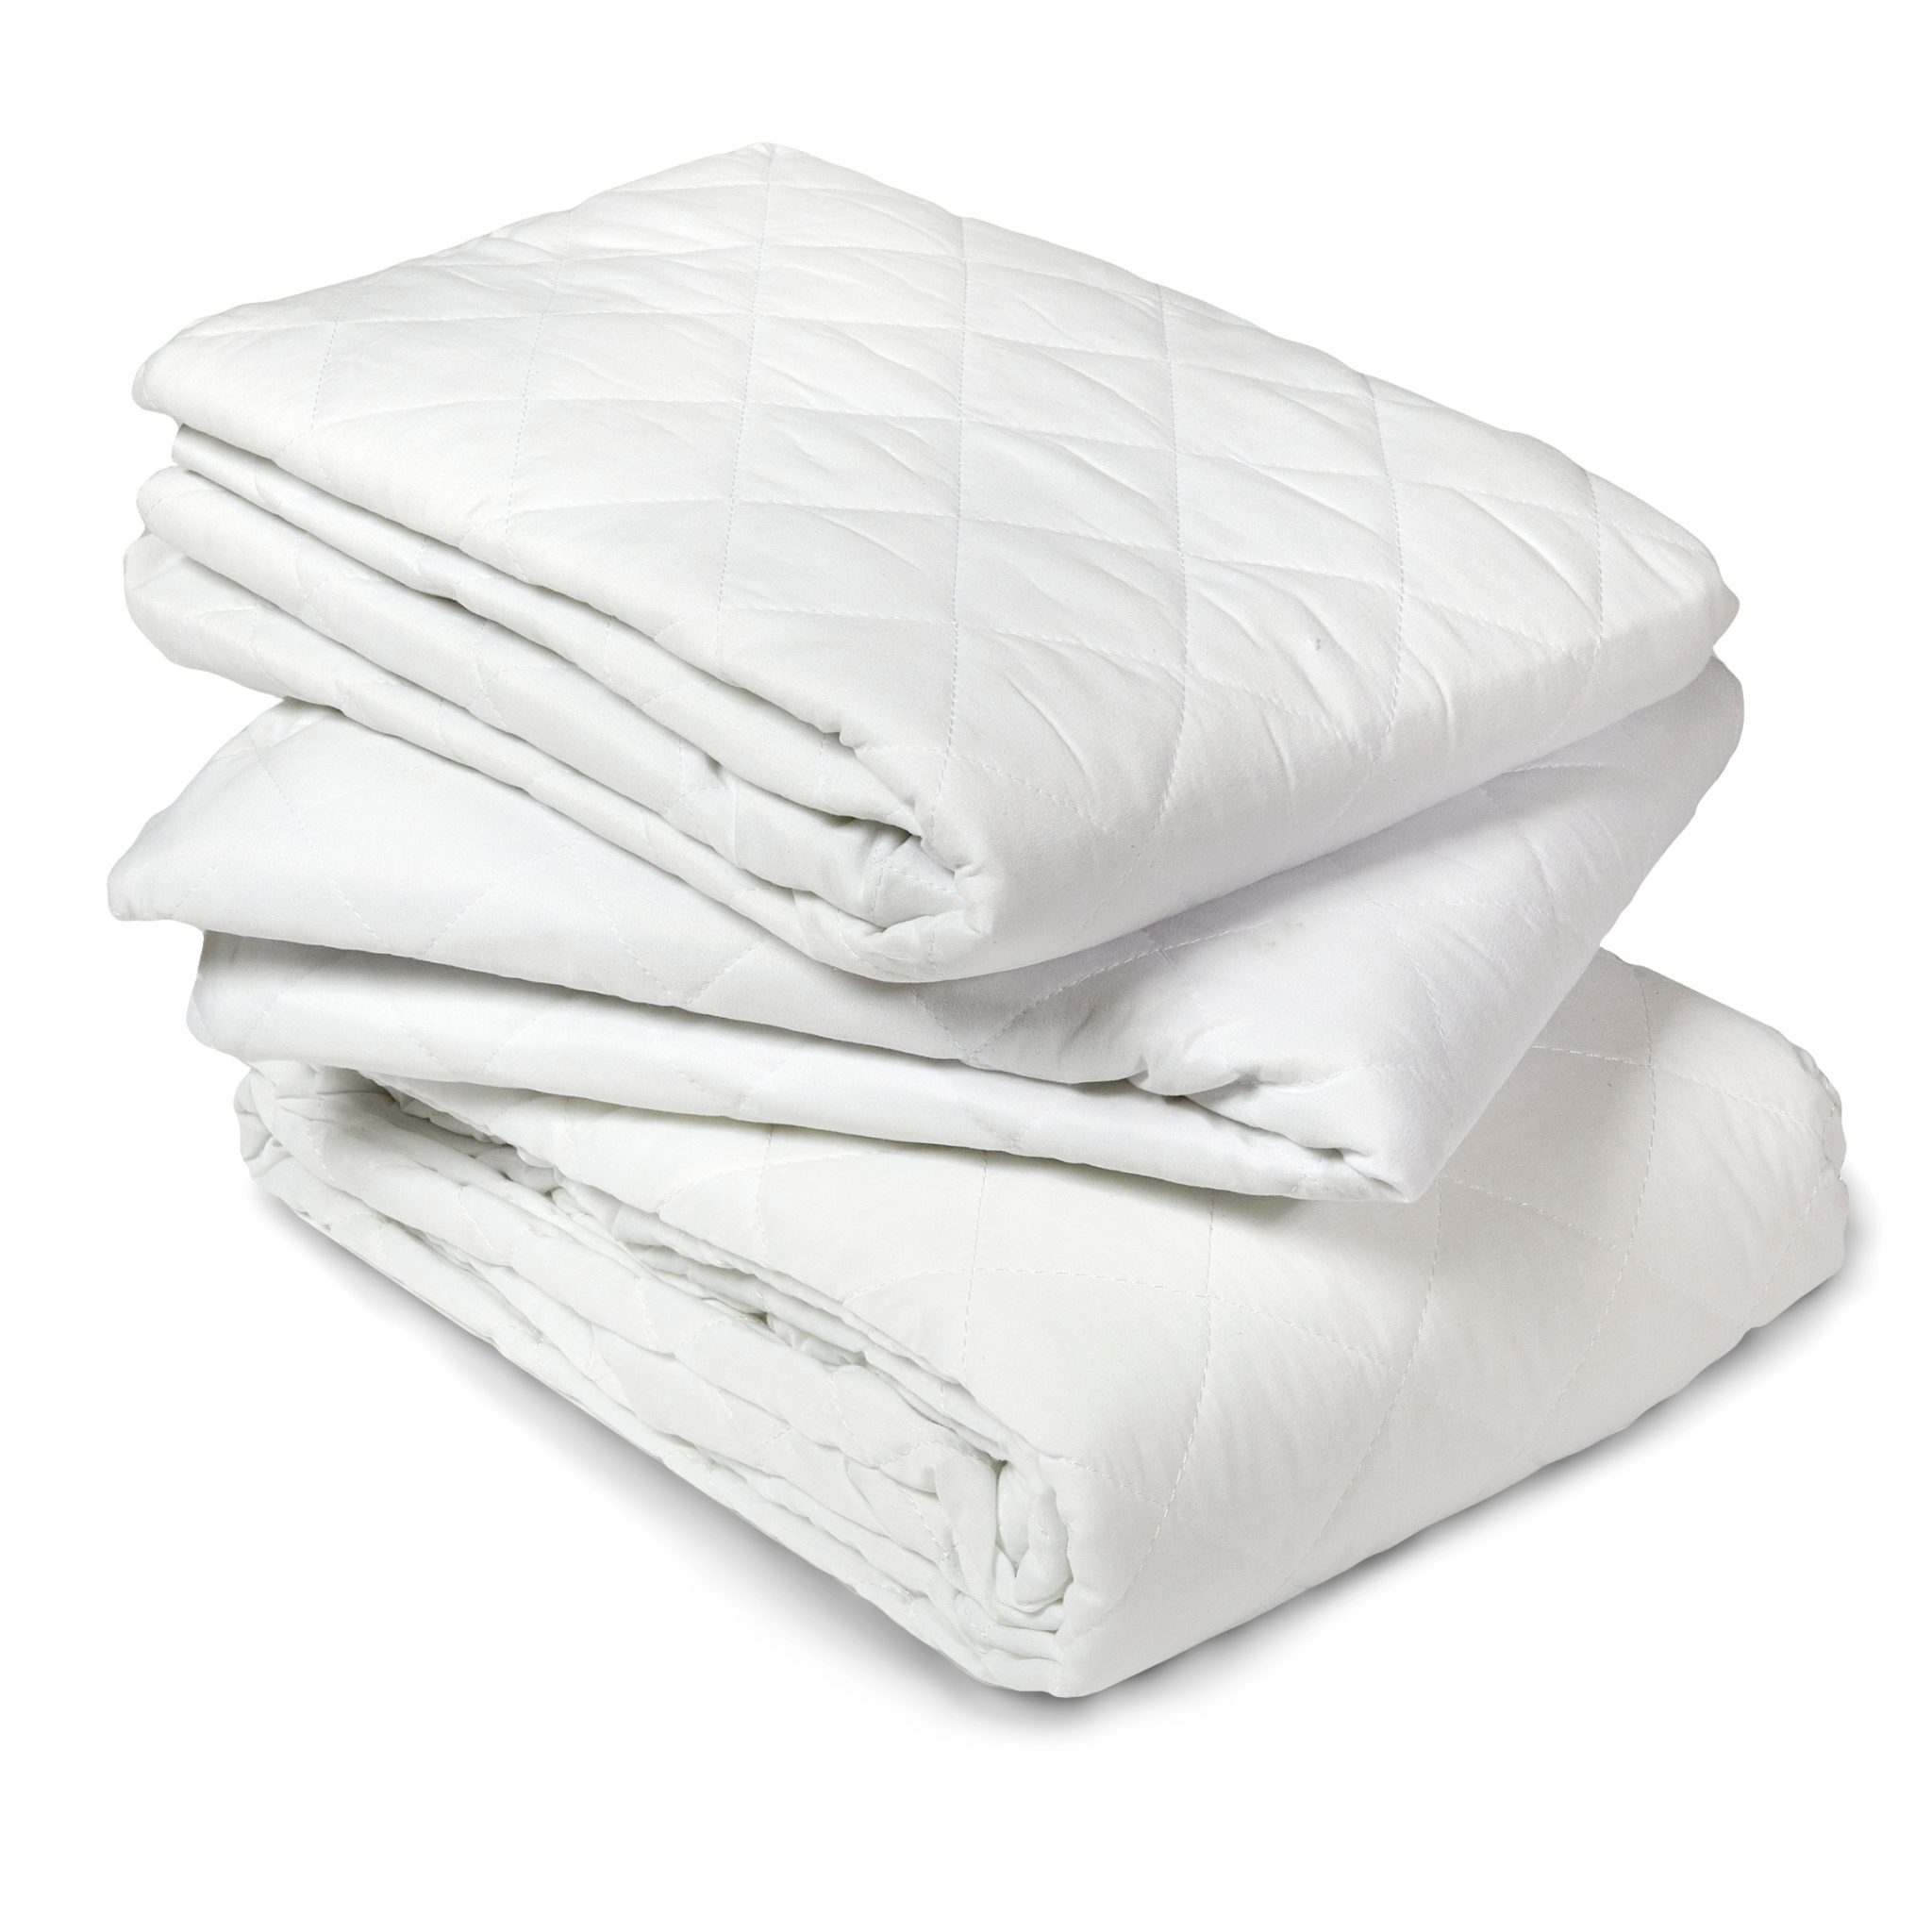 Mattress Protector Quilted Polycotton